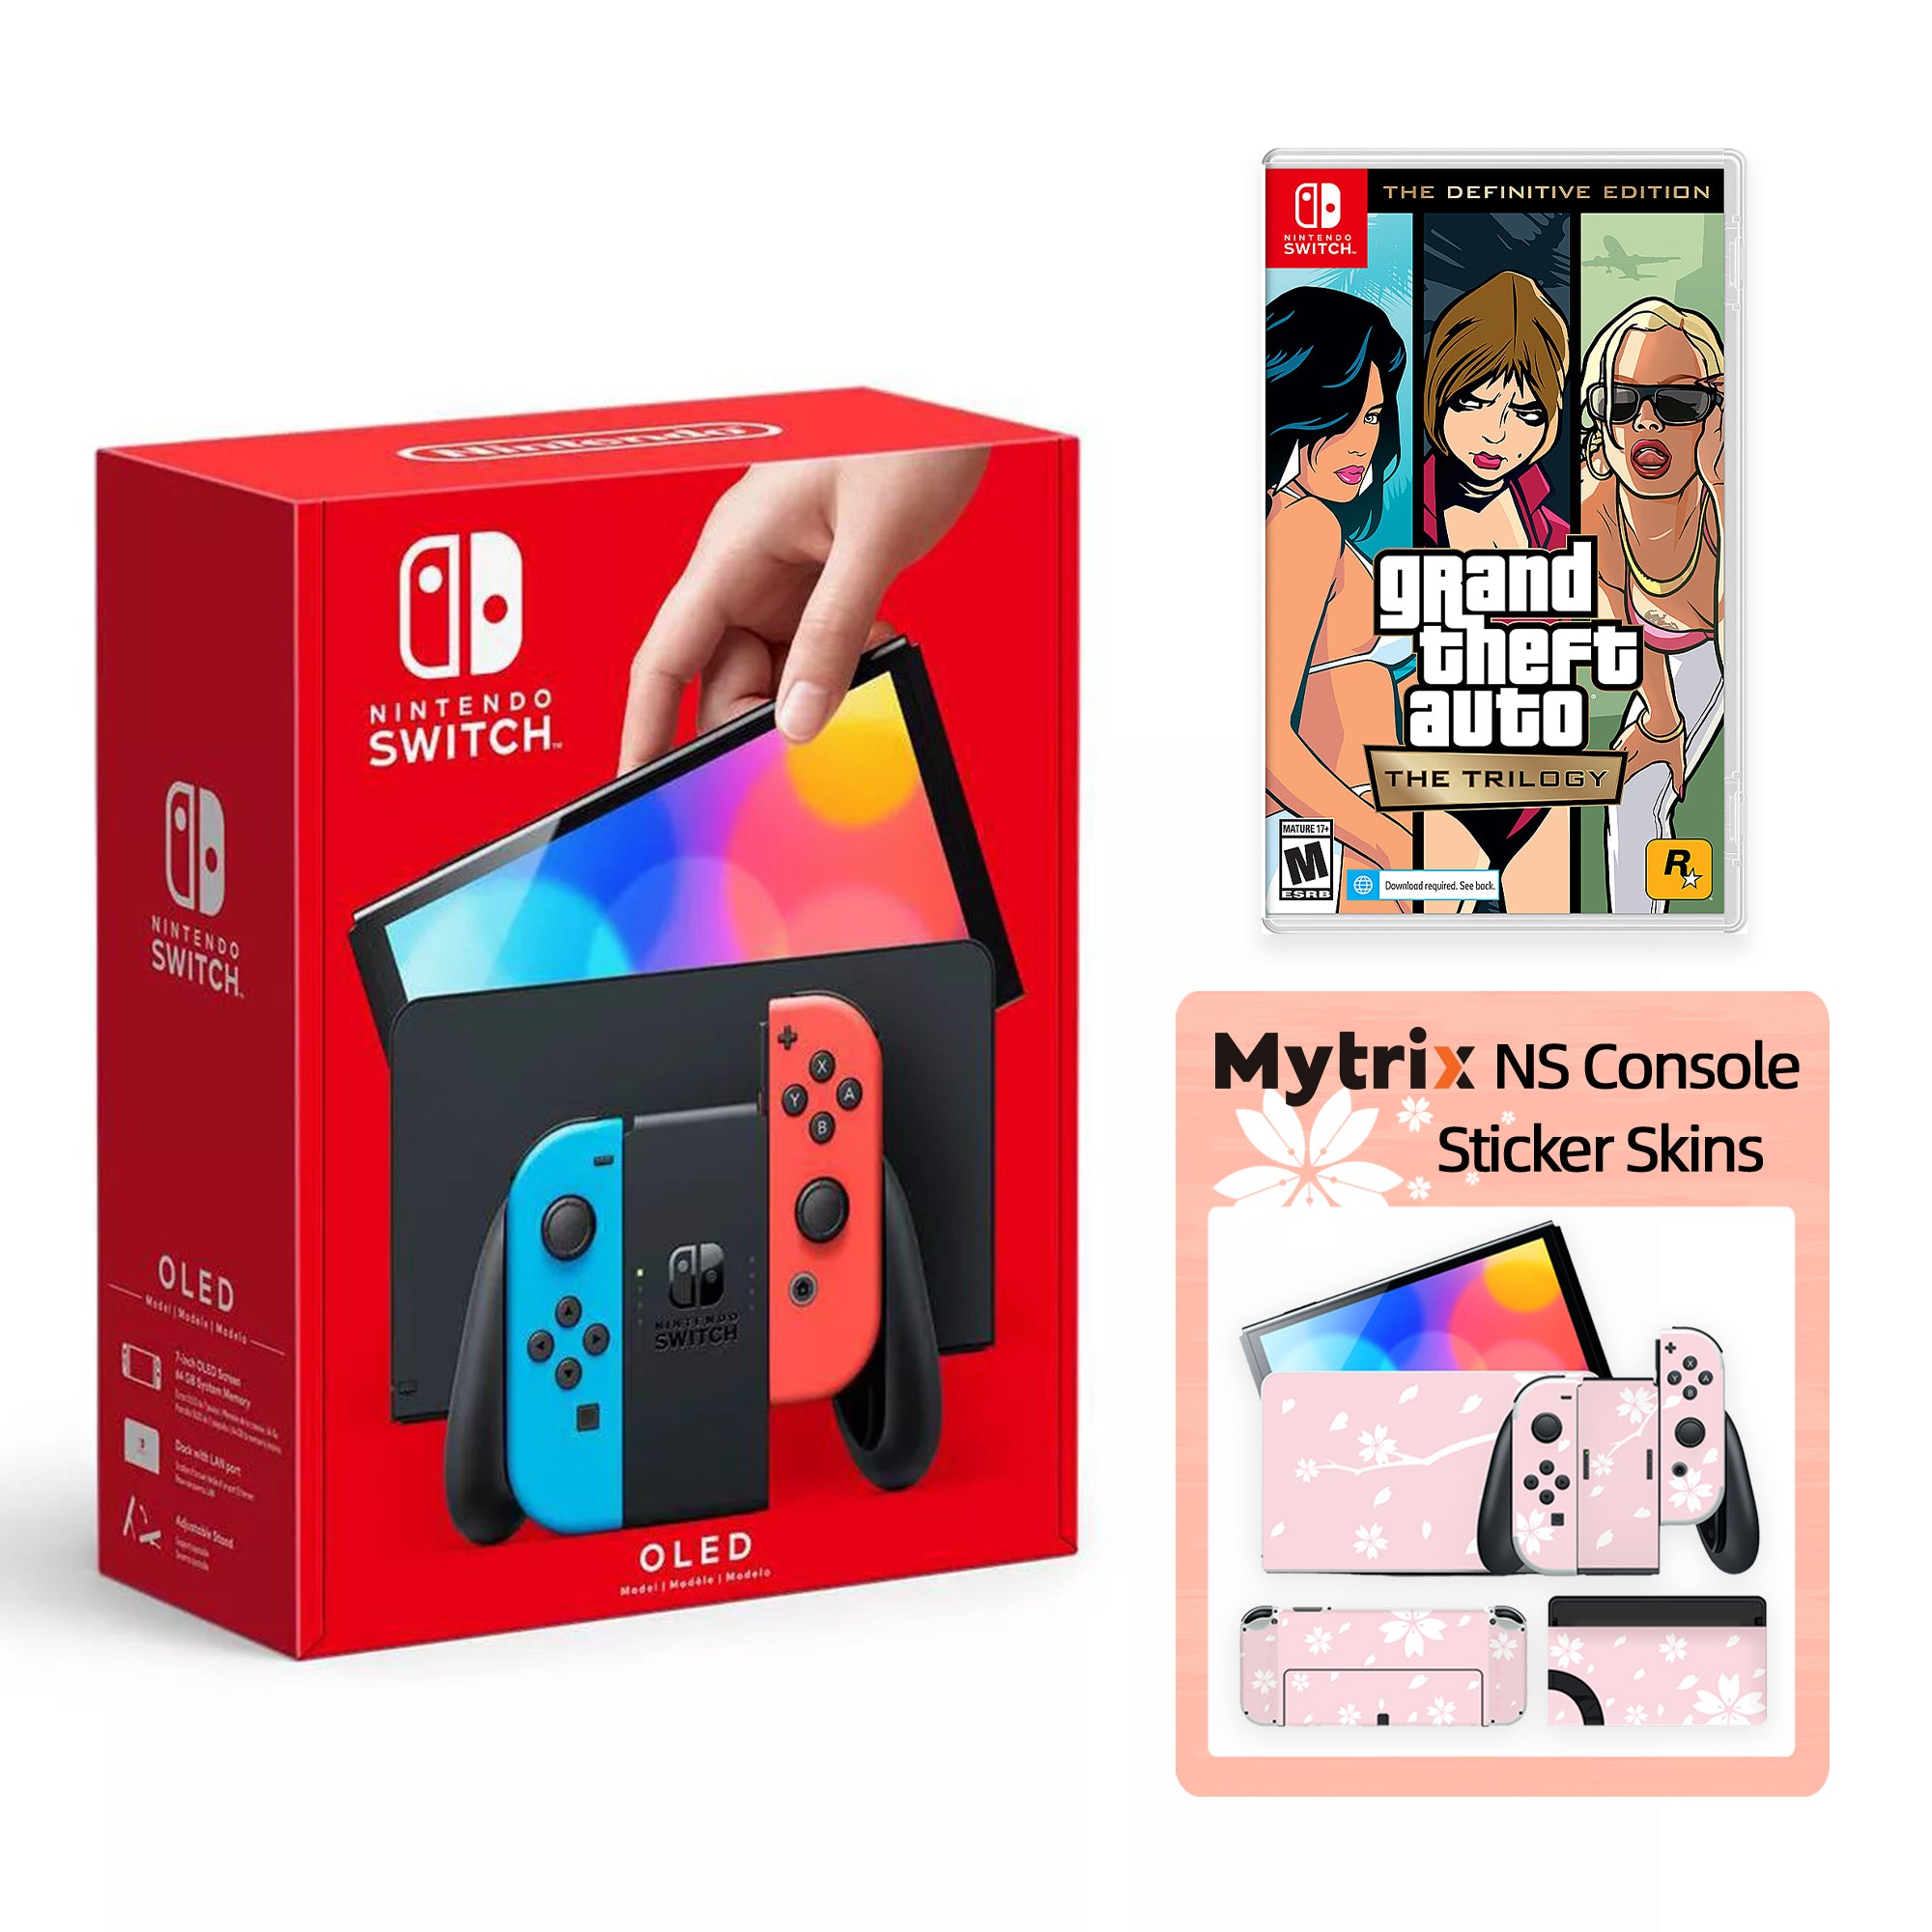 2022 New Nintendo Switch OLED Model Neon Red Blue Joy Con 64GB Console Improved HD Screen & LAN-Port Dock with Grand Theft Auto: The Trilogy, Mytrix Full Body Skin Sticker - Sakura Pink